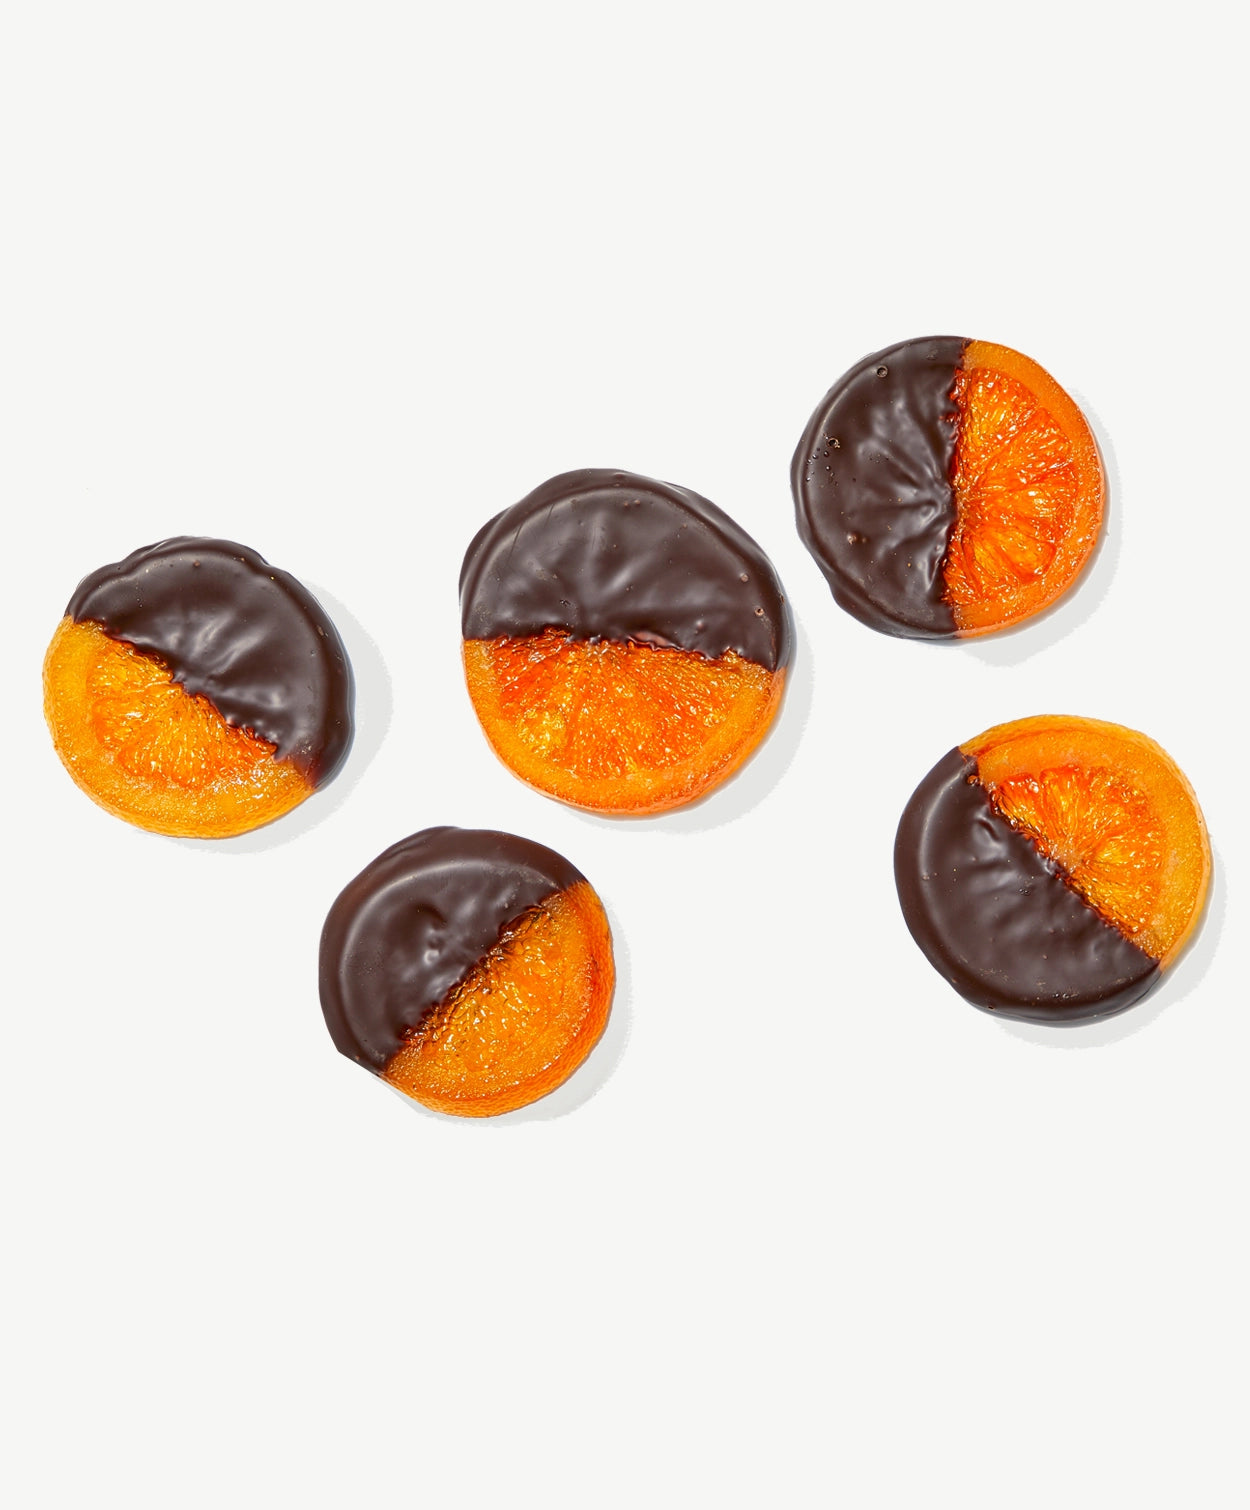 Five crystalized candied orange slices dipped in dark Vosges chocolate laying flat on a white background.